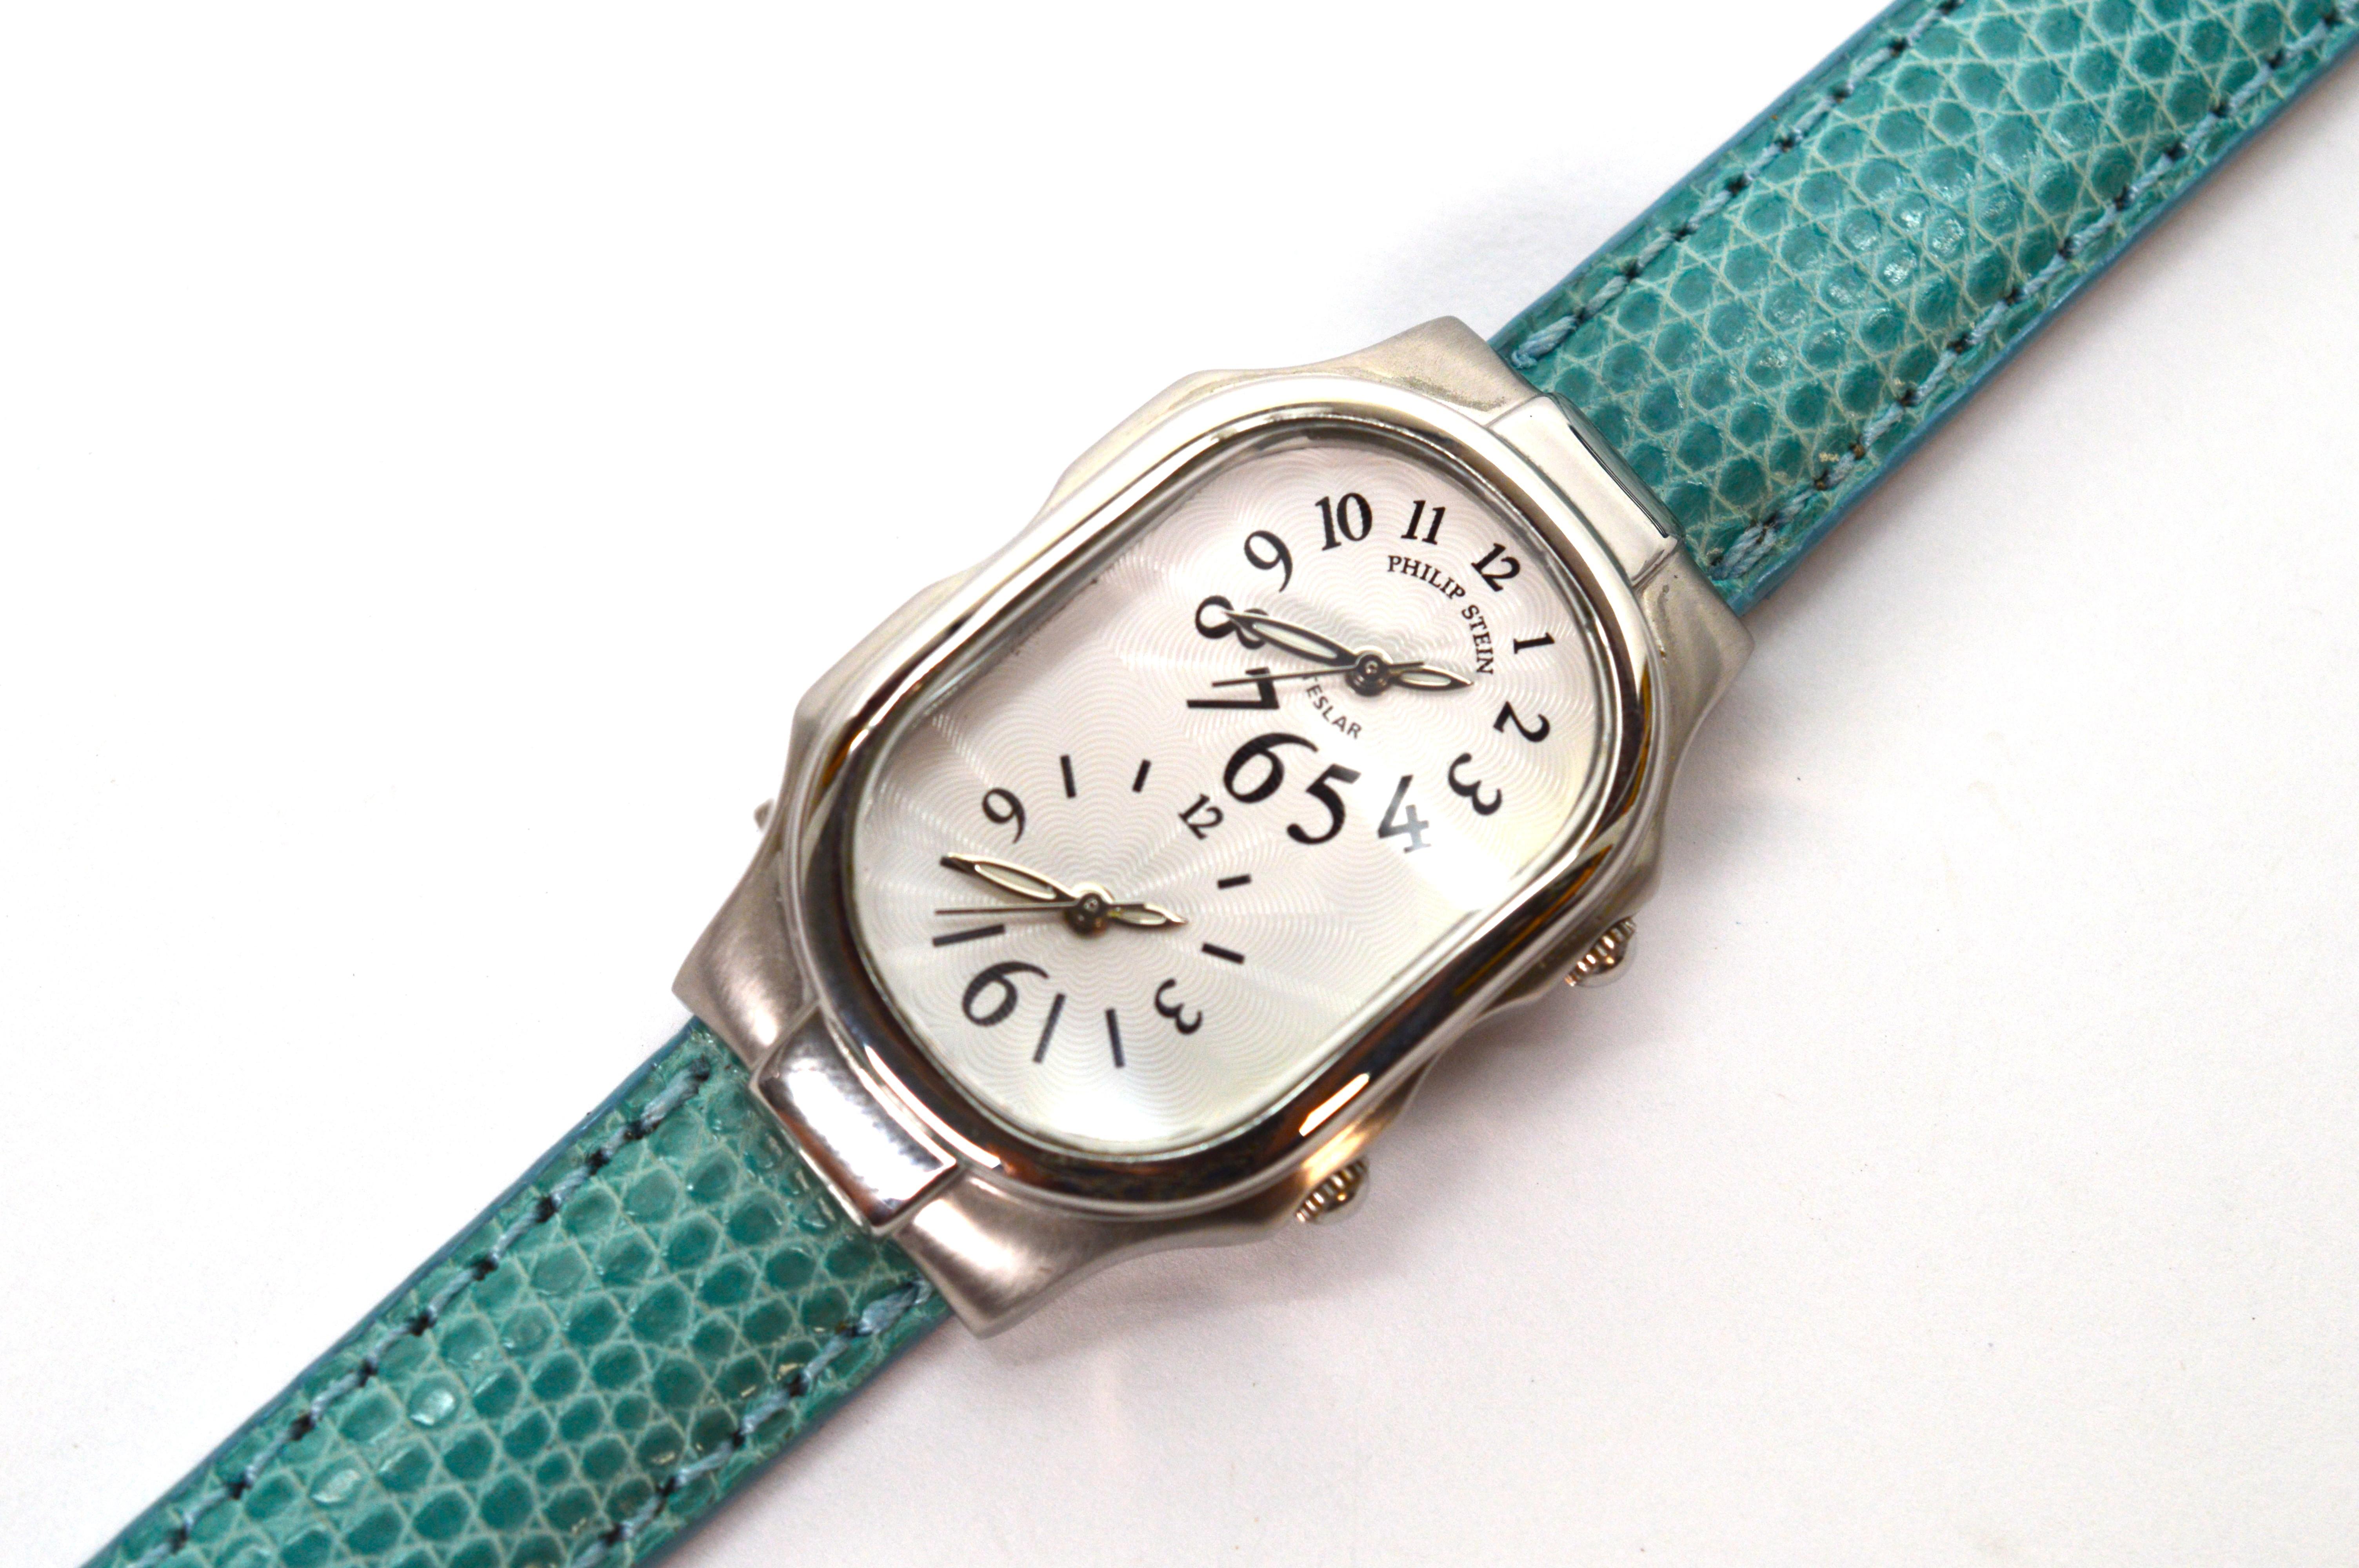 Timeless style marries innovation in this women's wrist watch by Philip Stein.  Perfect for travel and monitoring time to connect with family across the country and abroad, this smart looking quartz watch boasts an oval two dial dual time zone